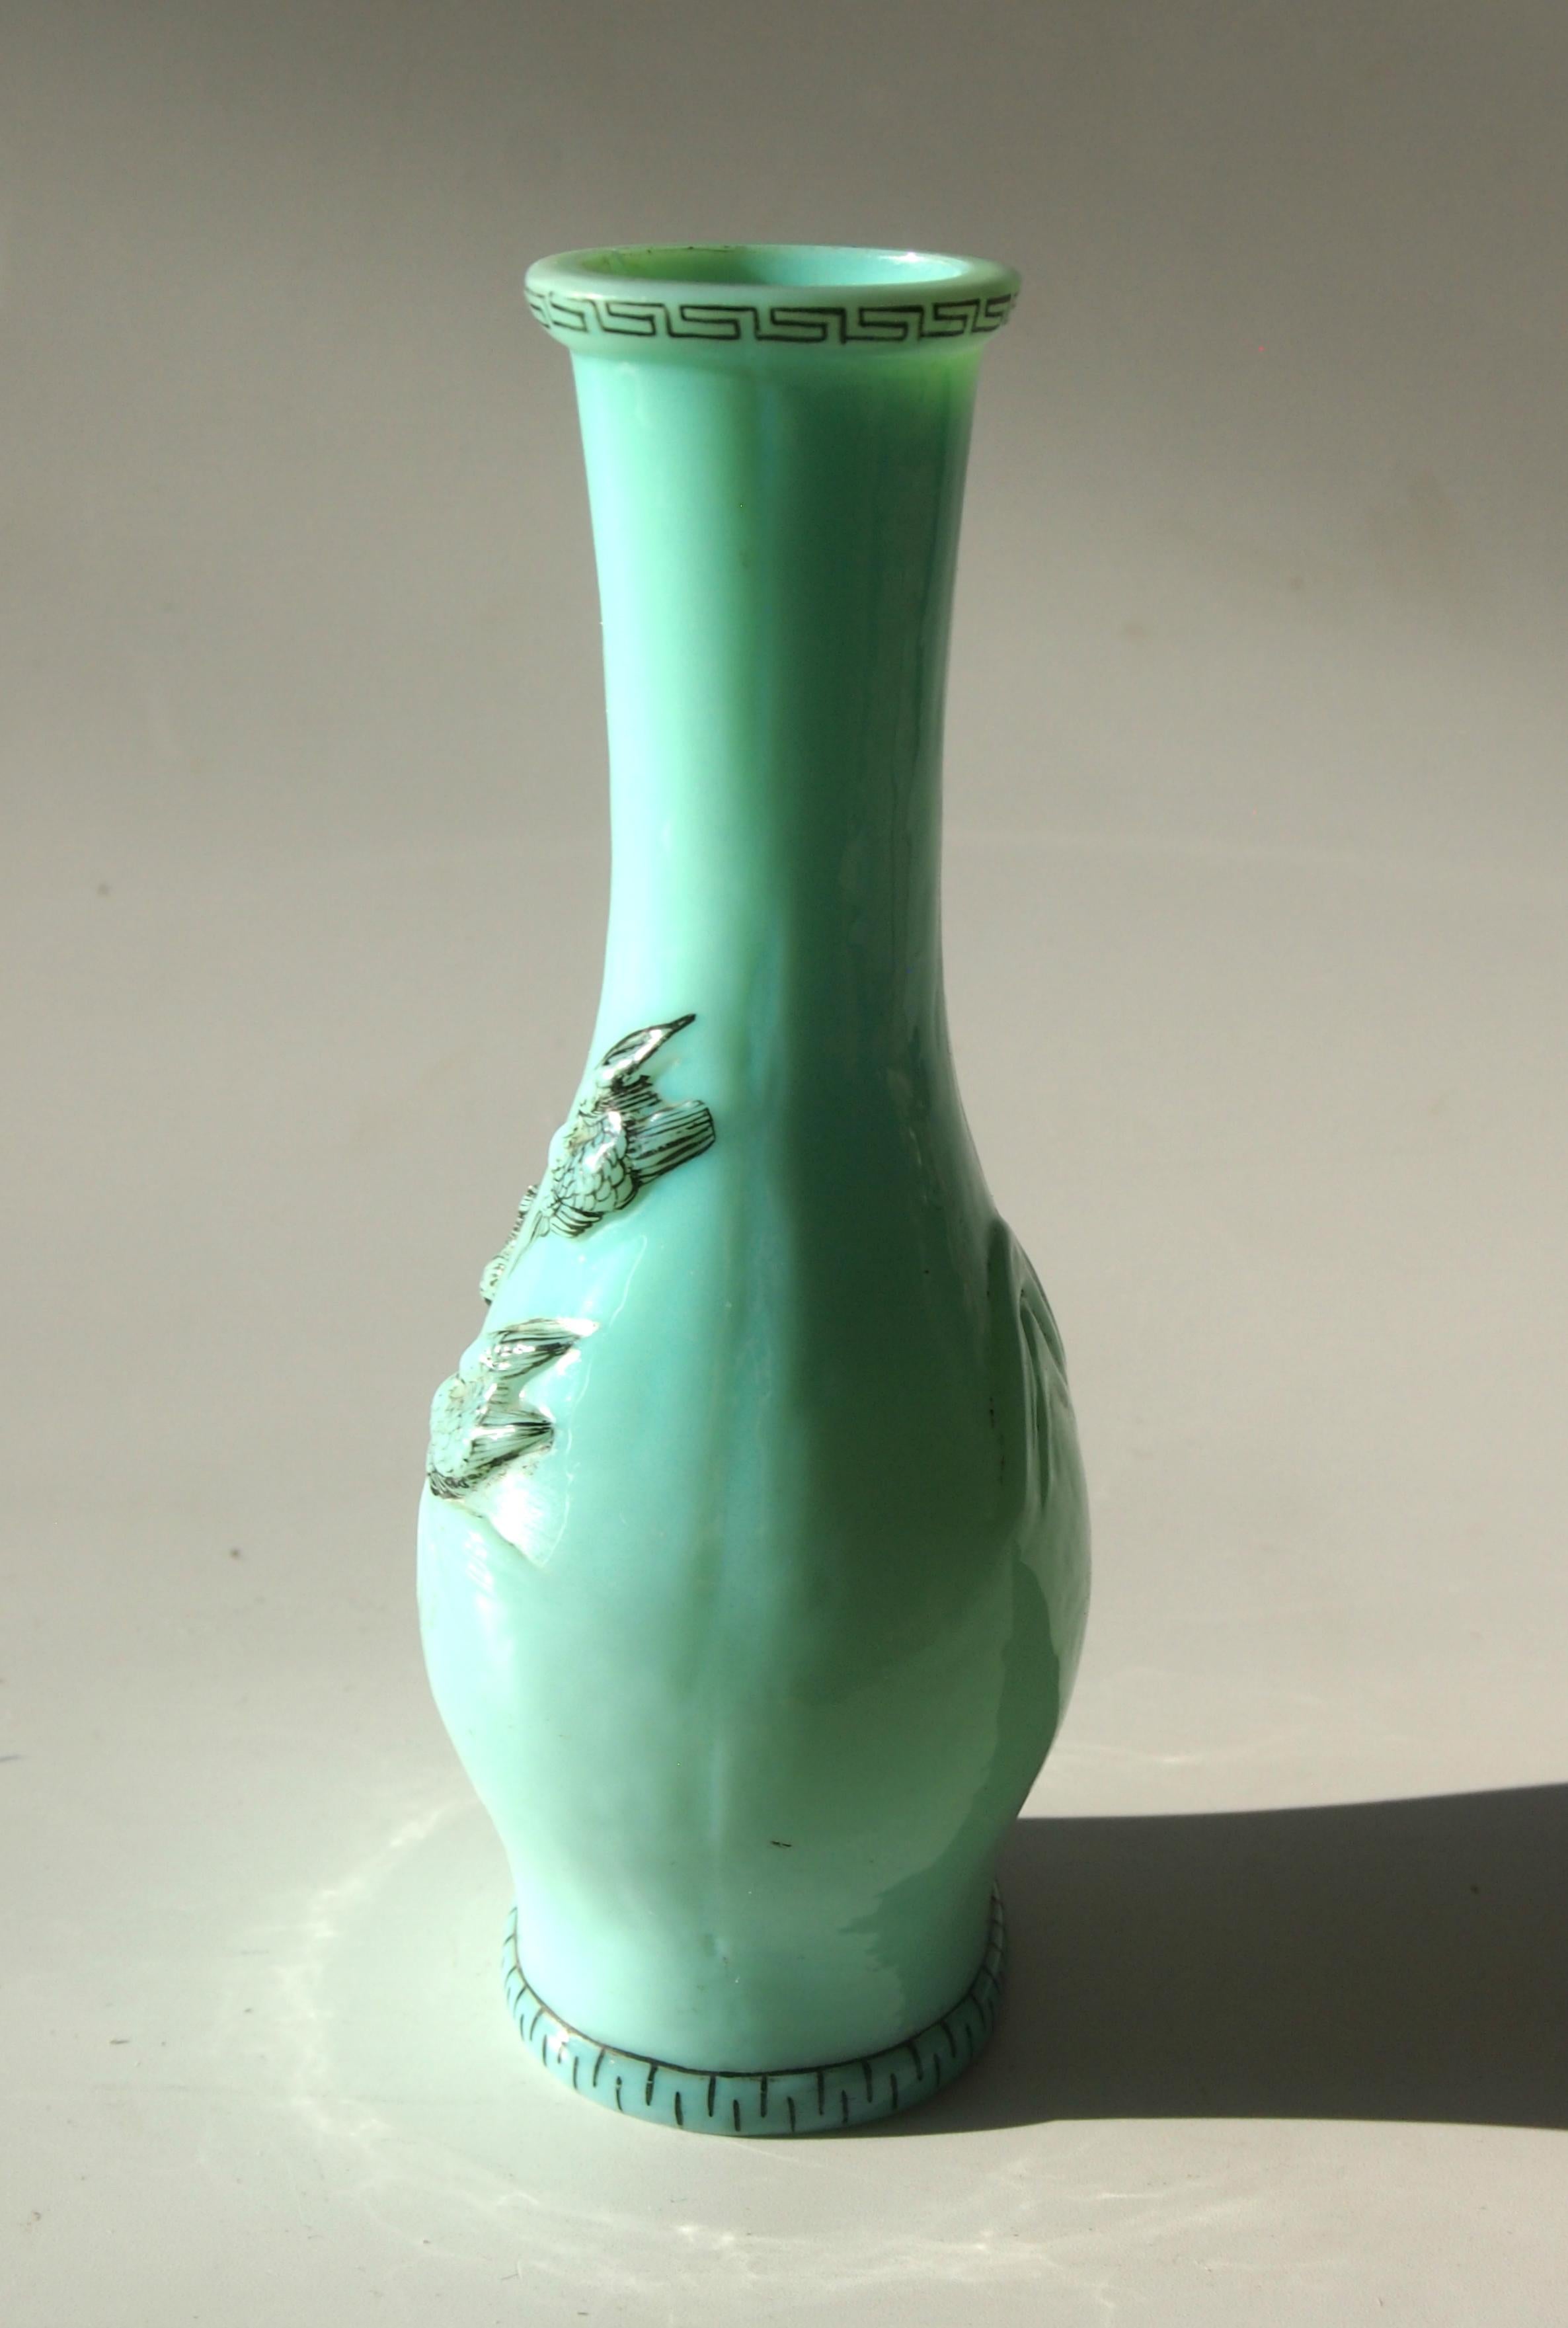 Small Harrach chinoiserie vase made to imitate Chinese Jade, mould blow and decorated with a Greek key pattern, flying birds and a mountain range -an example from the same mould resides in the Harrach depository.

Harrach has been the backbone of